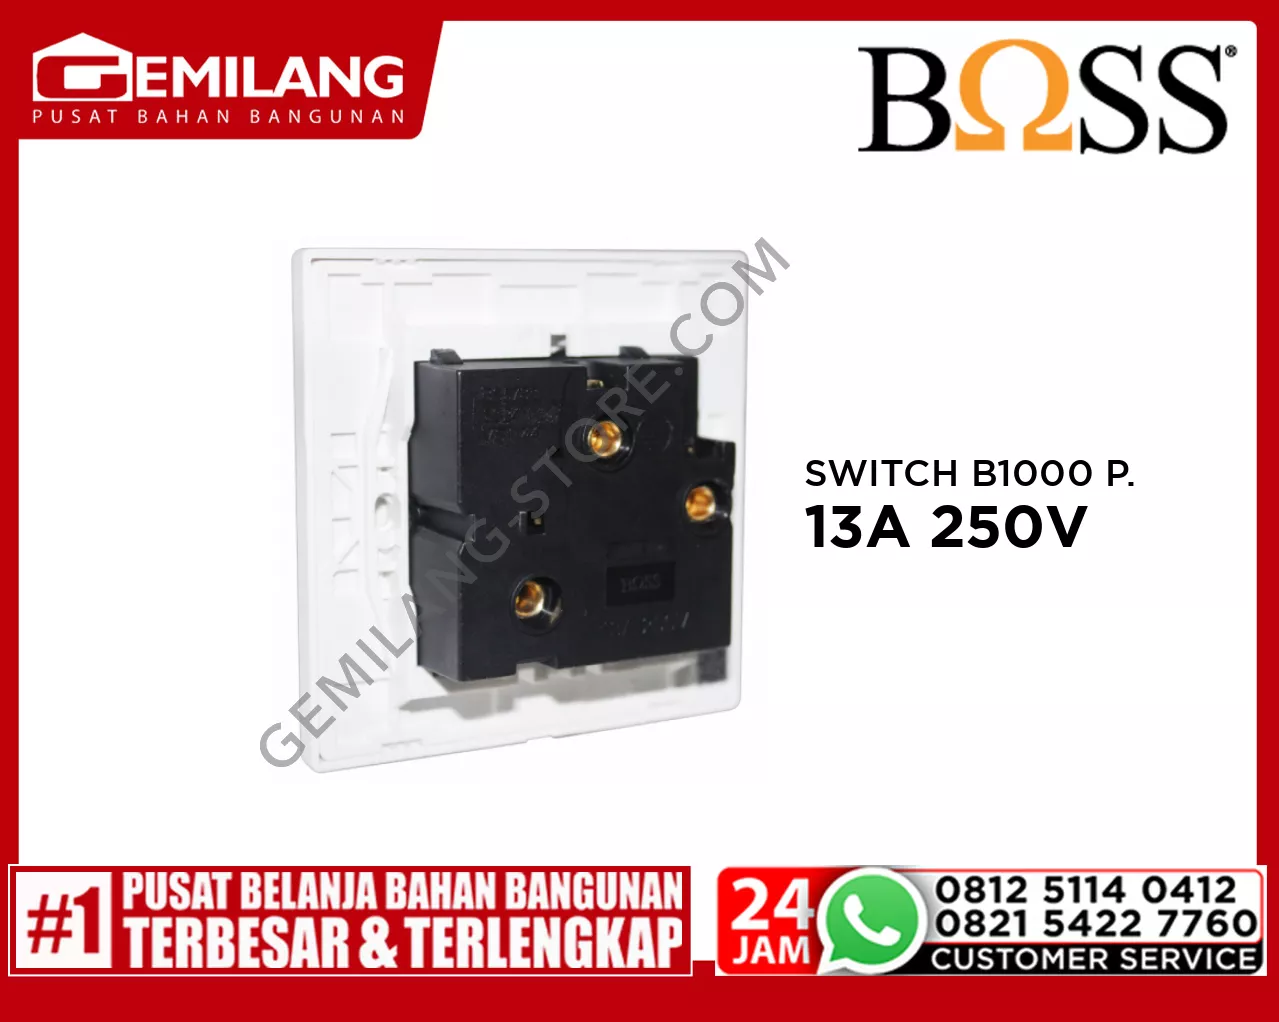 BOSS SWITCH B1000 PURO UNI.SOCKET OUTLET W/NEON & SAFETY 13A 250V B10113LSN